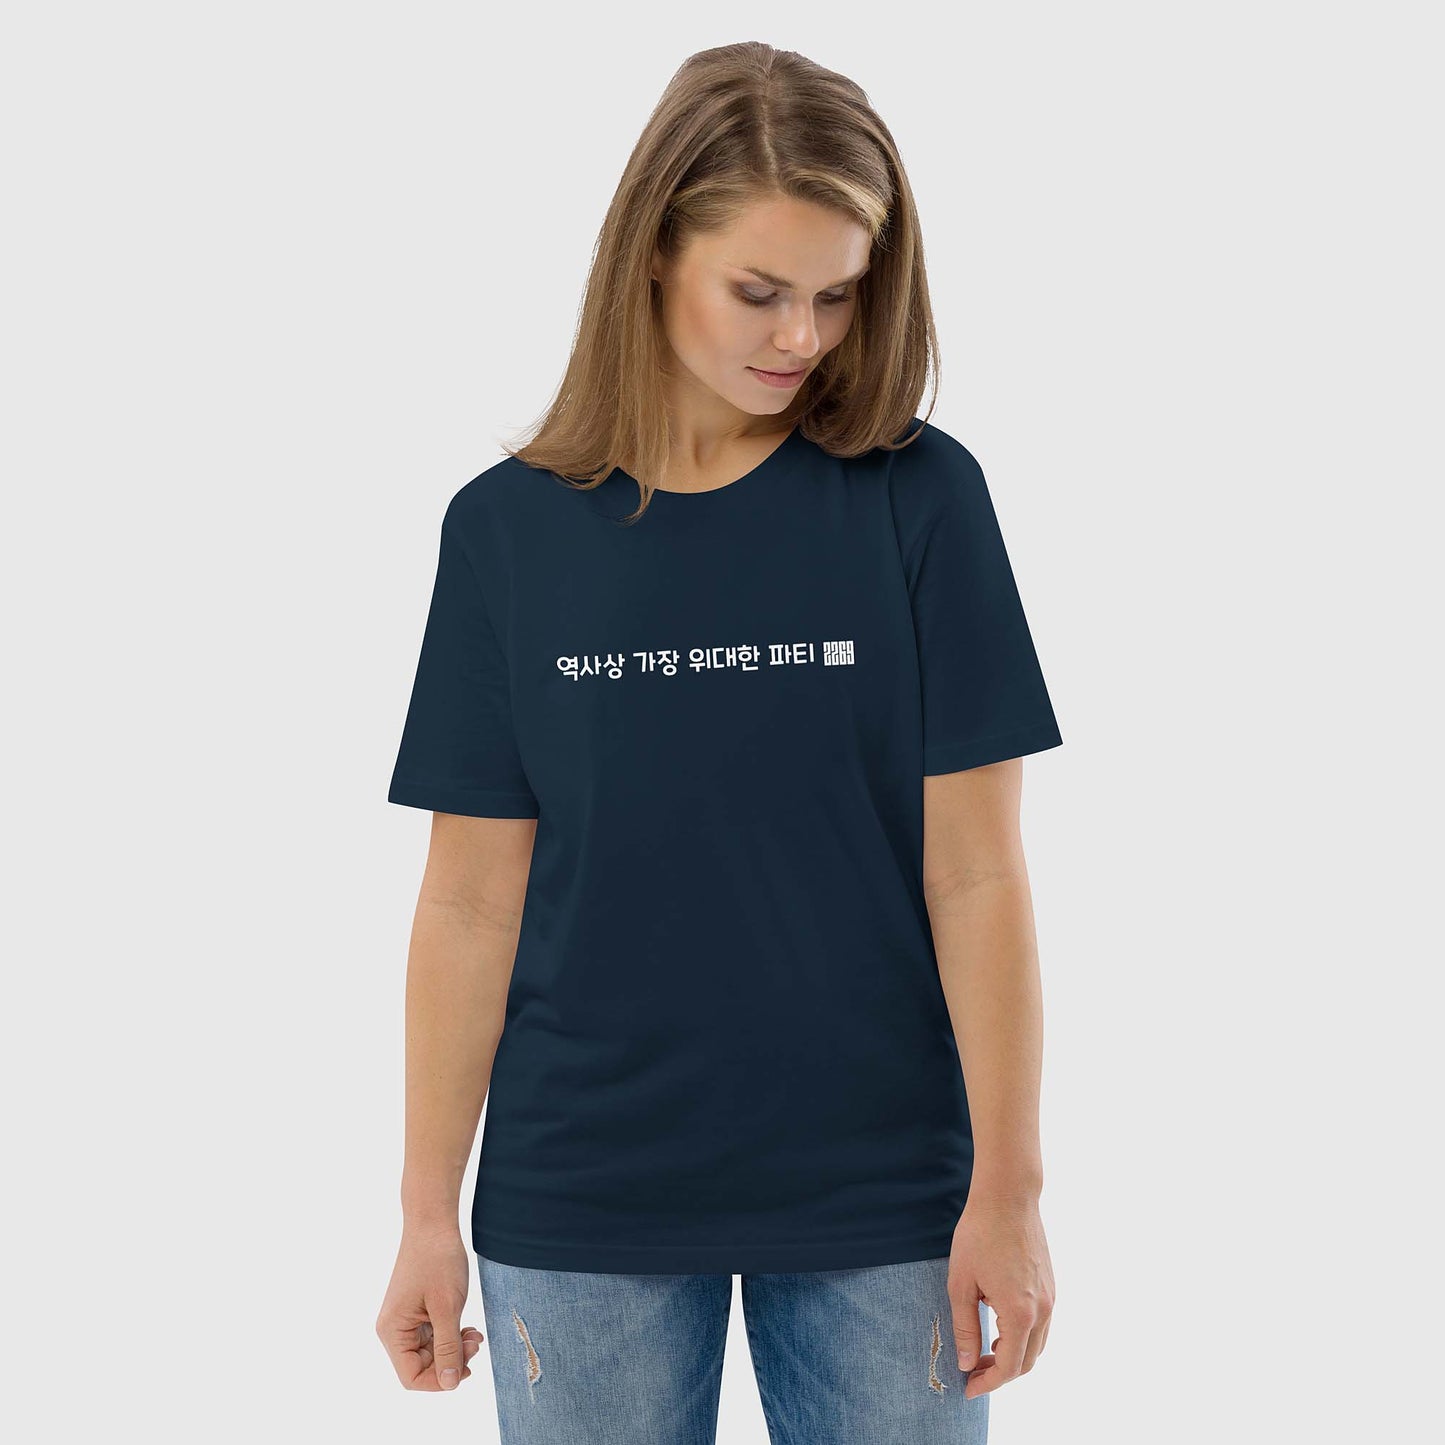 Unisex navy organic cotton t-shirt with Korean 2269 party message